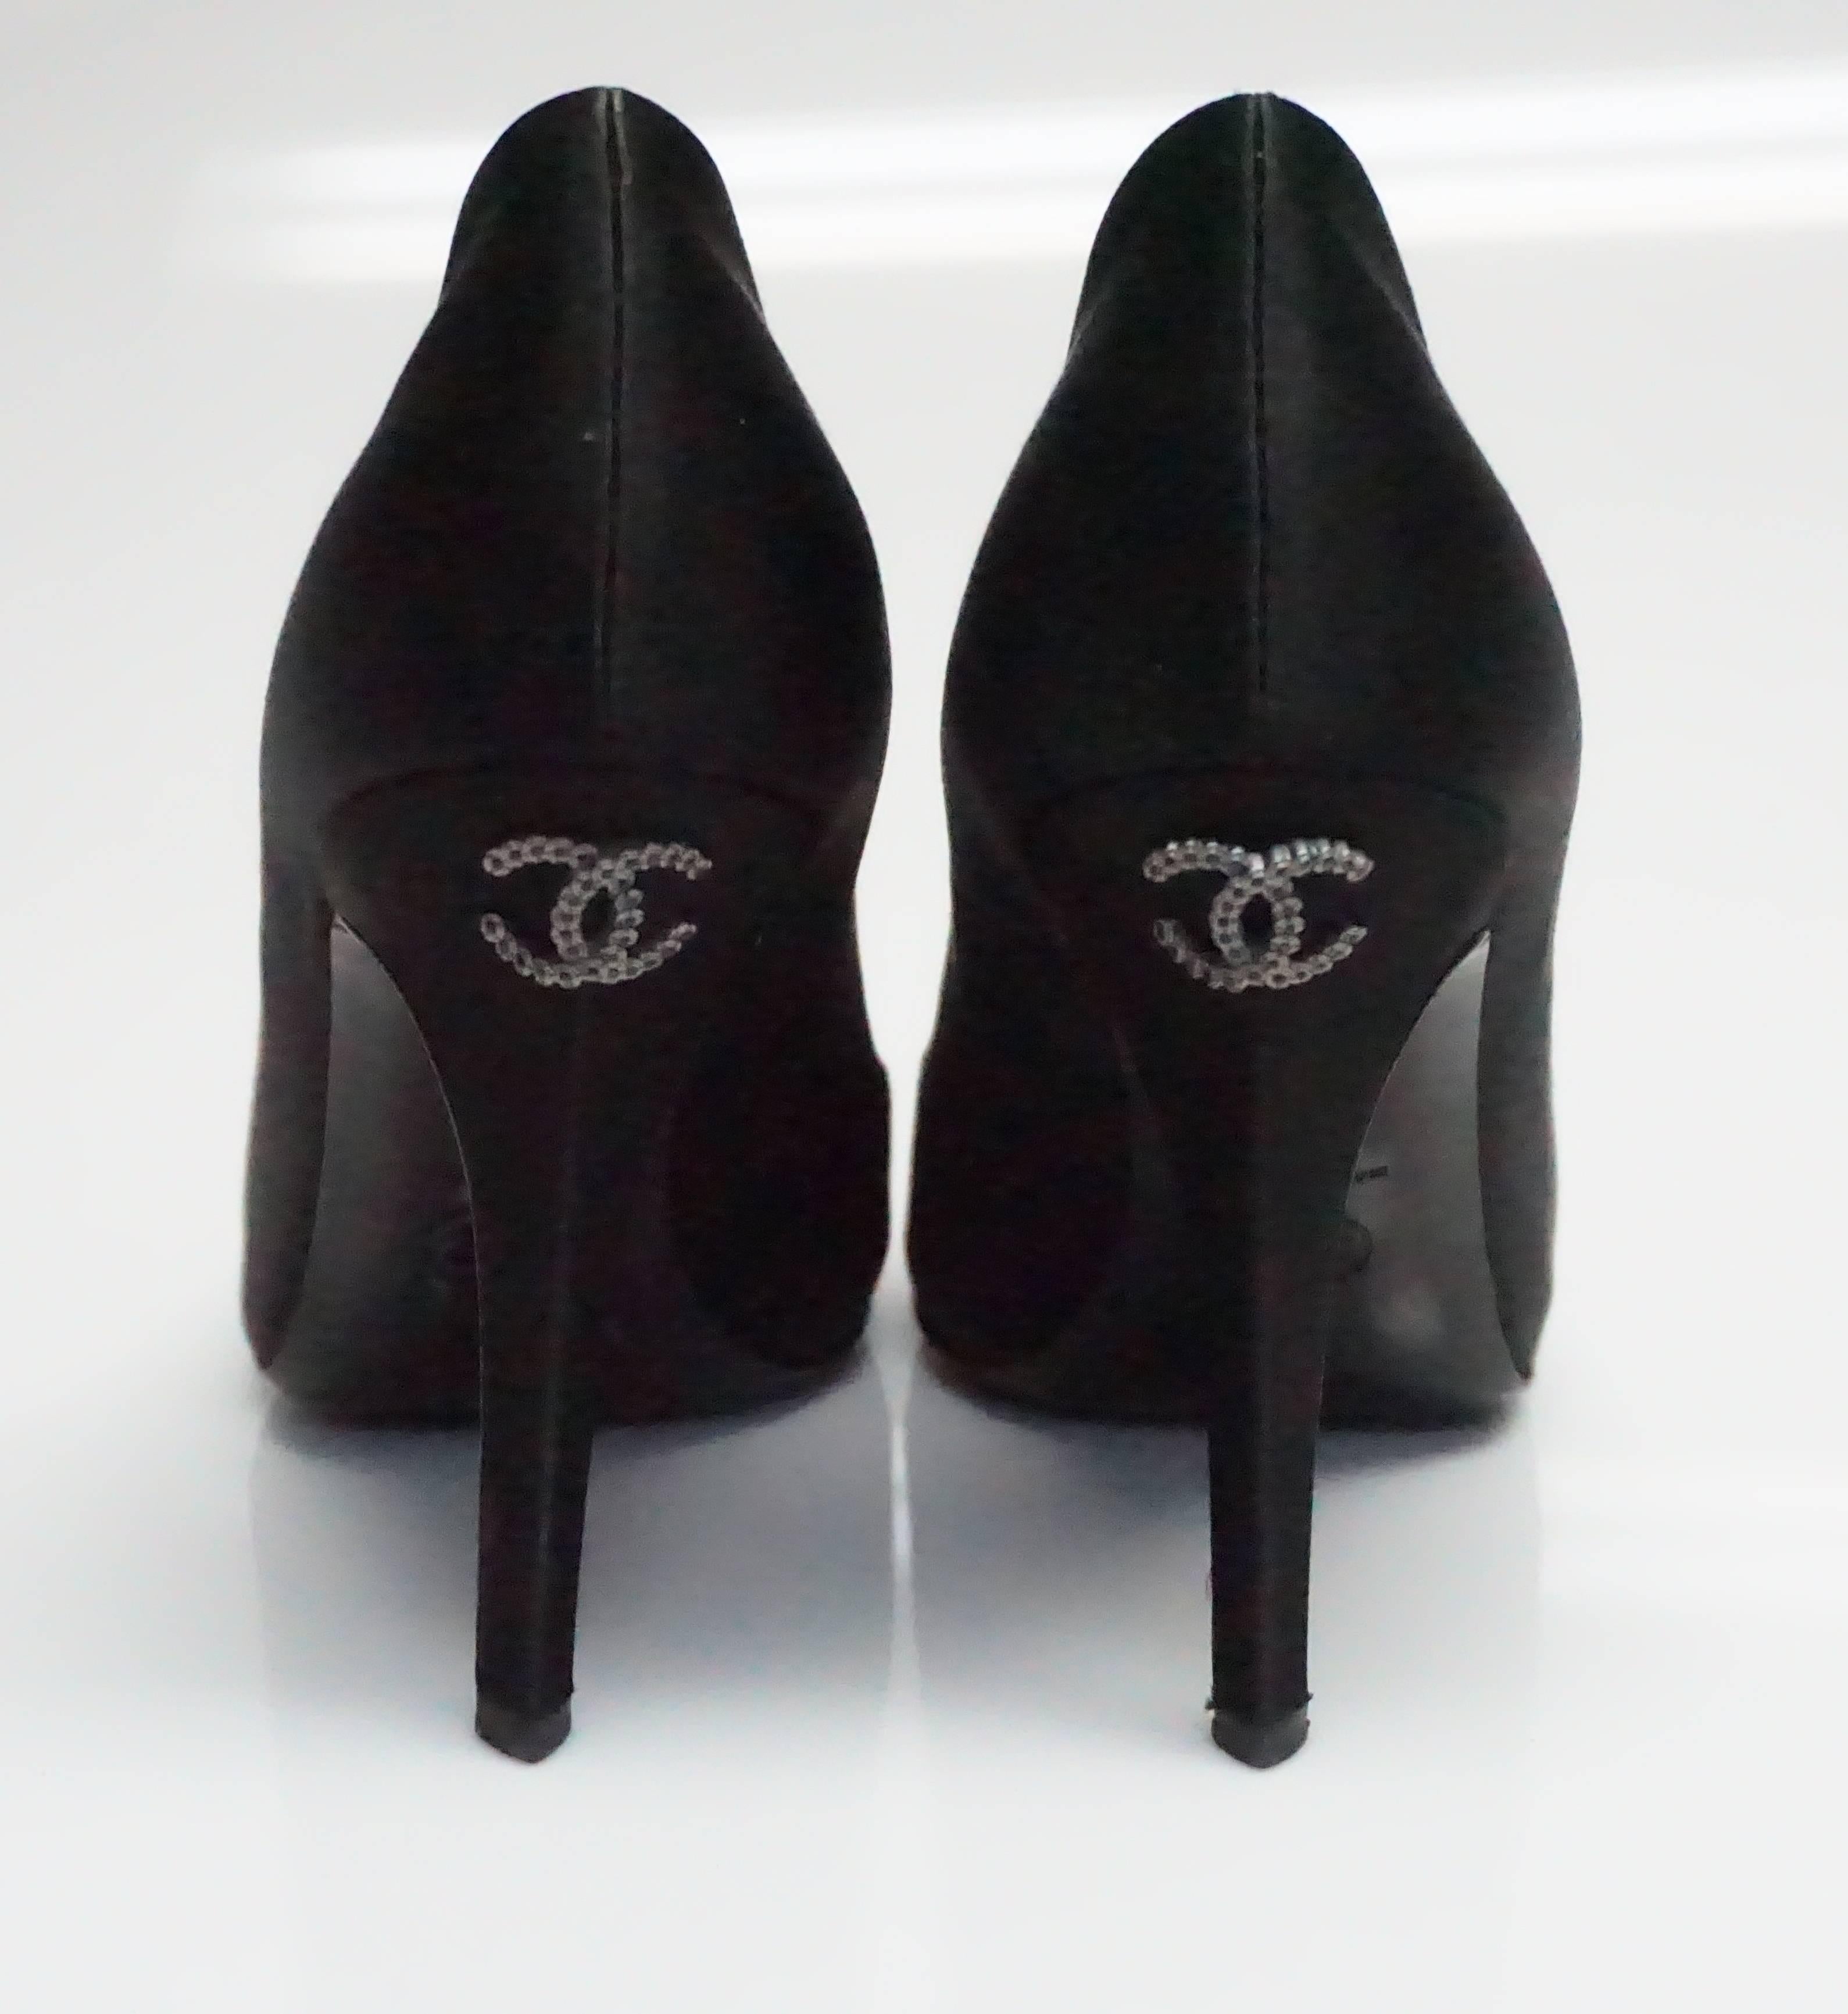 Chanel Black Satin Classic Pump w/ CC logo - 40.5 In Excellent Condition For Sale In West Palm Beach, FL